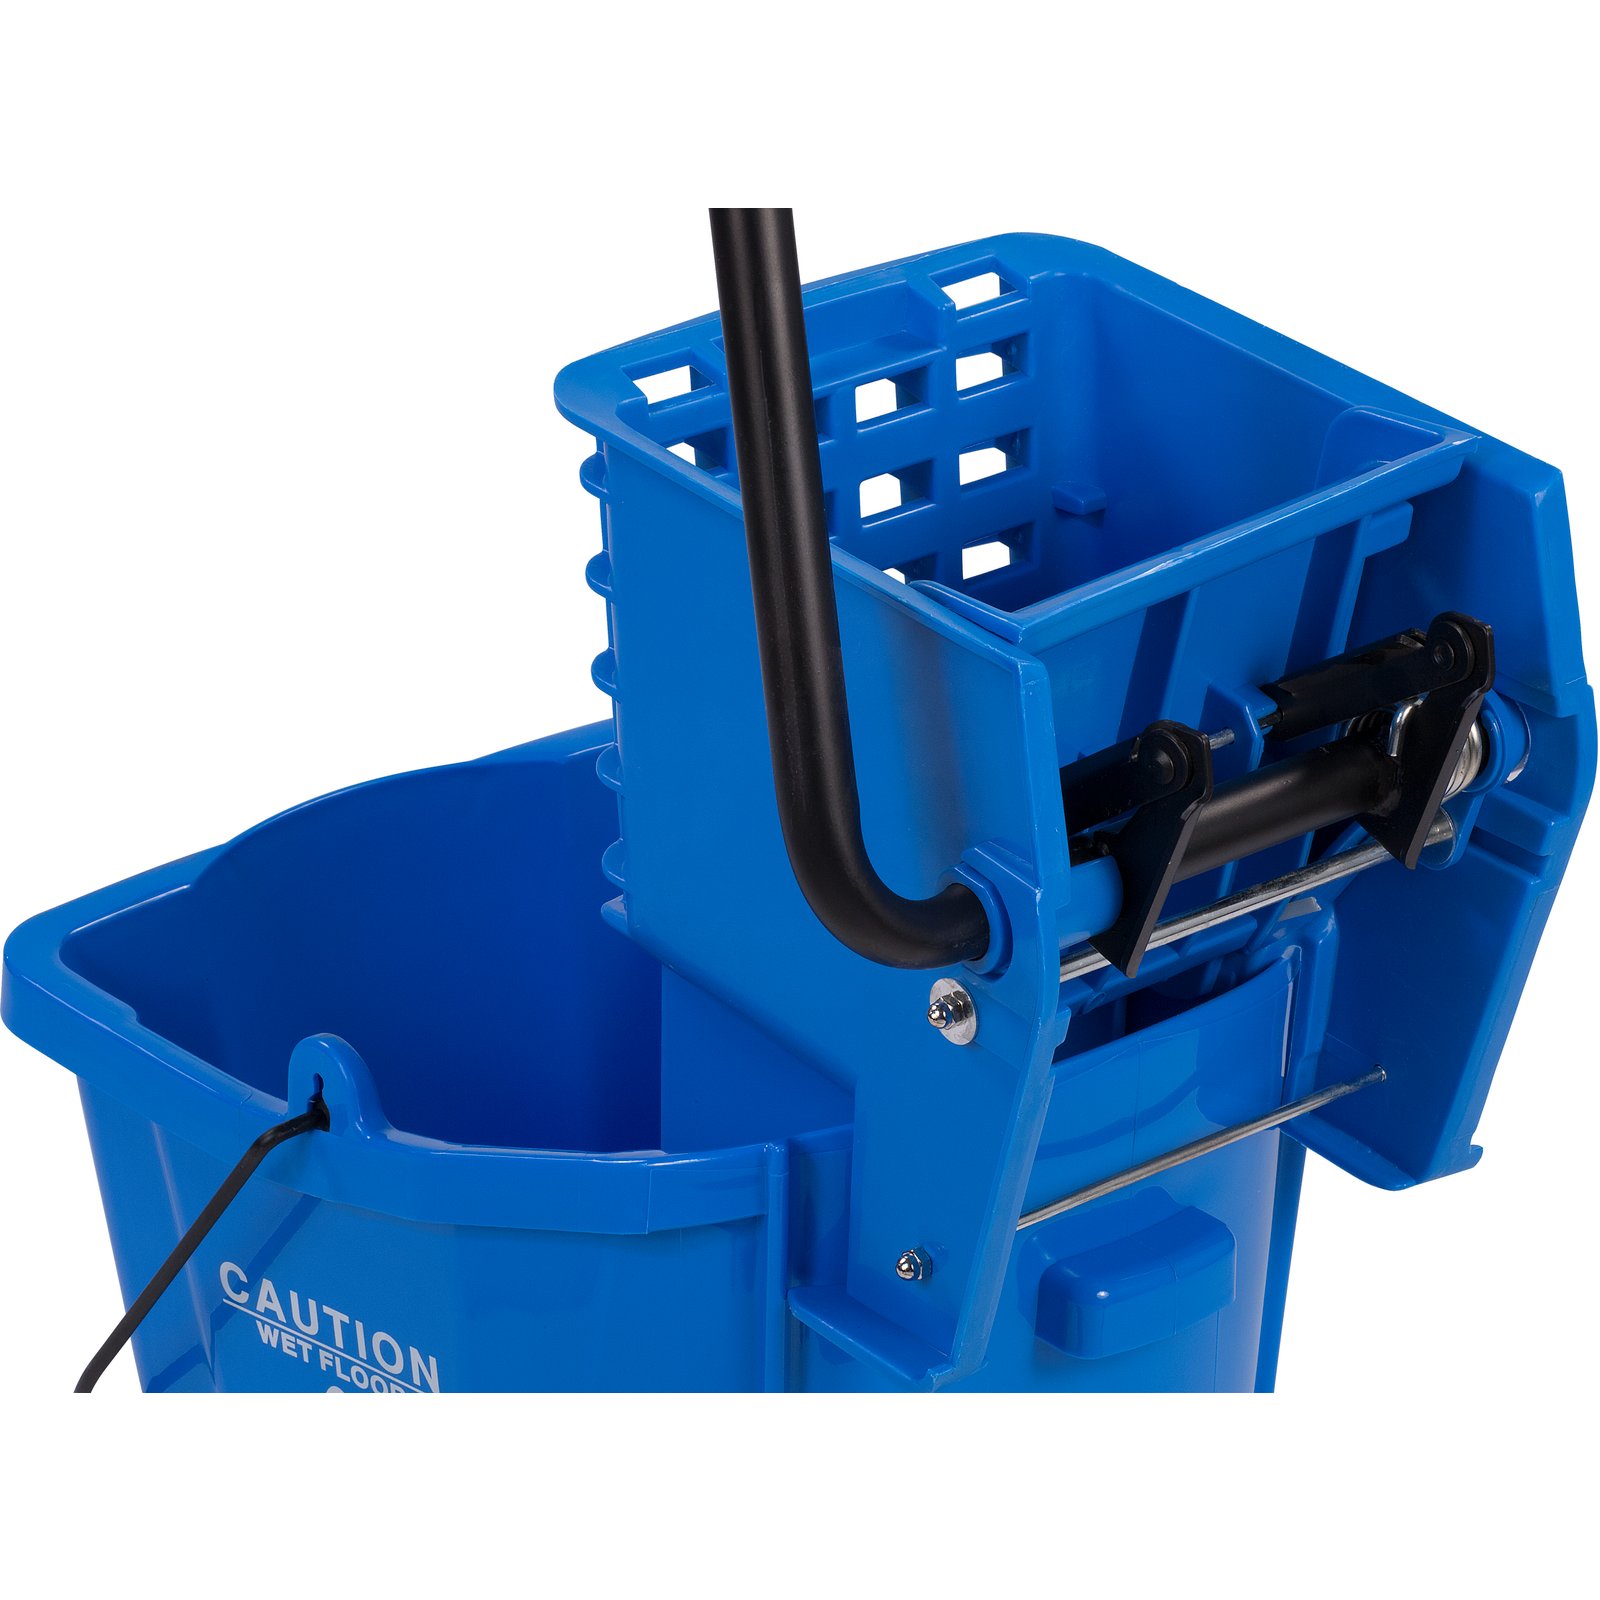  Mop Bucket and Wringer, 8-3/4 gal, Blue : Health & Household